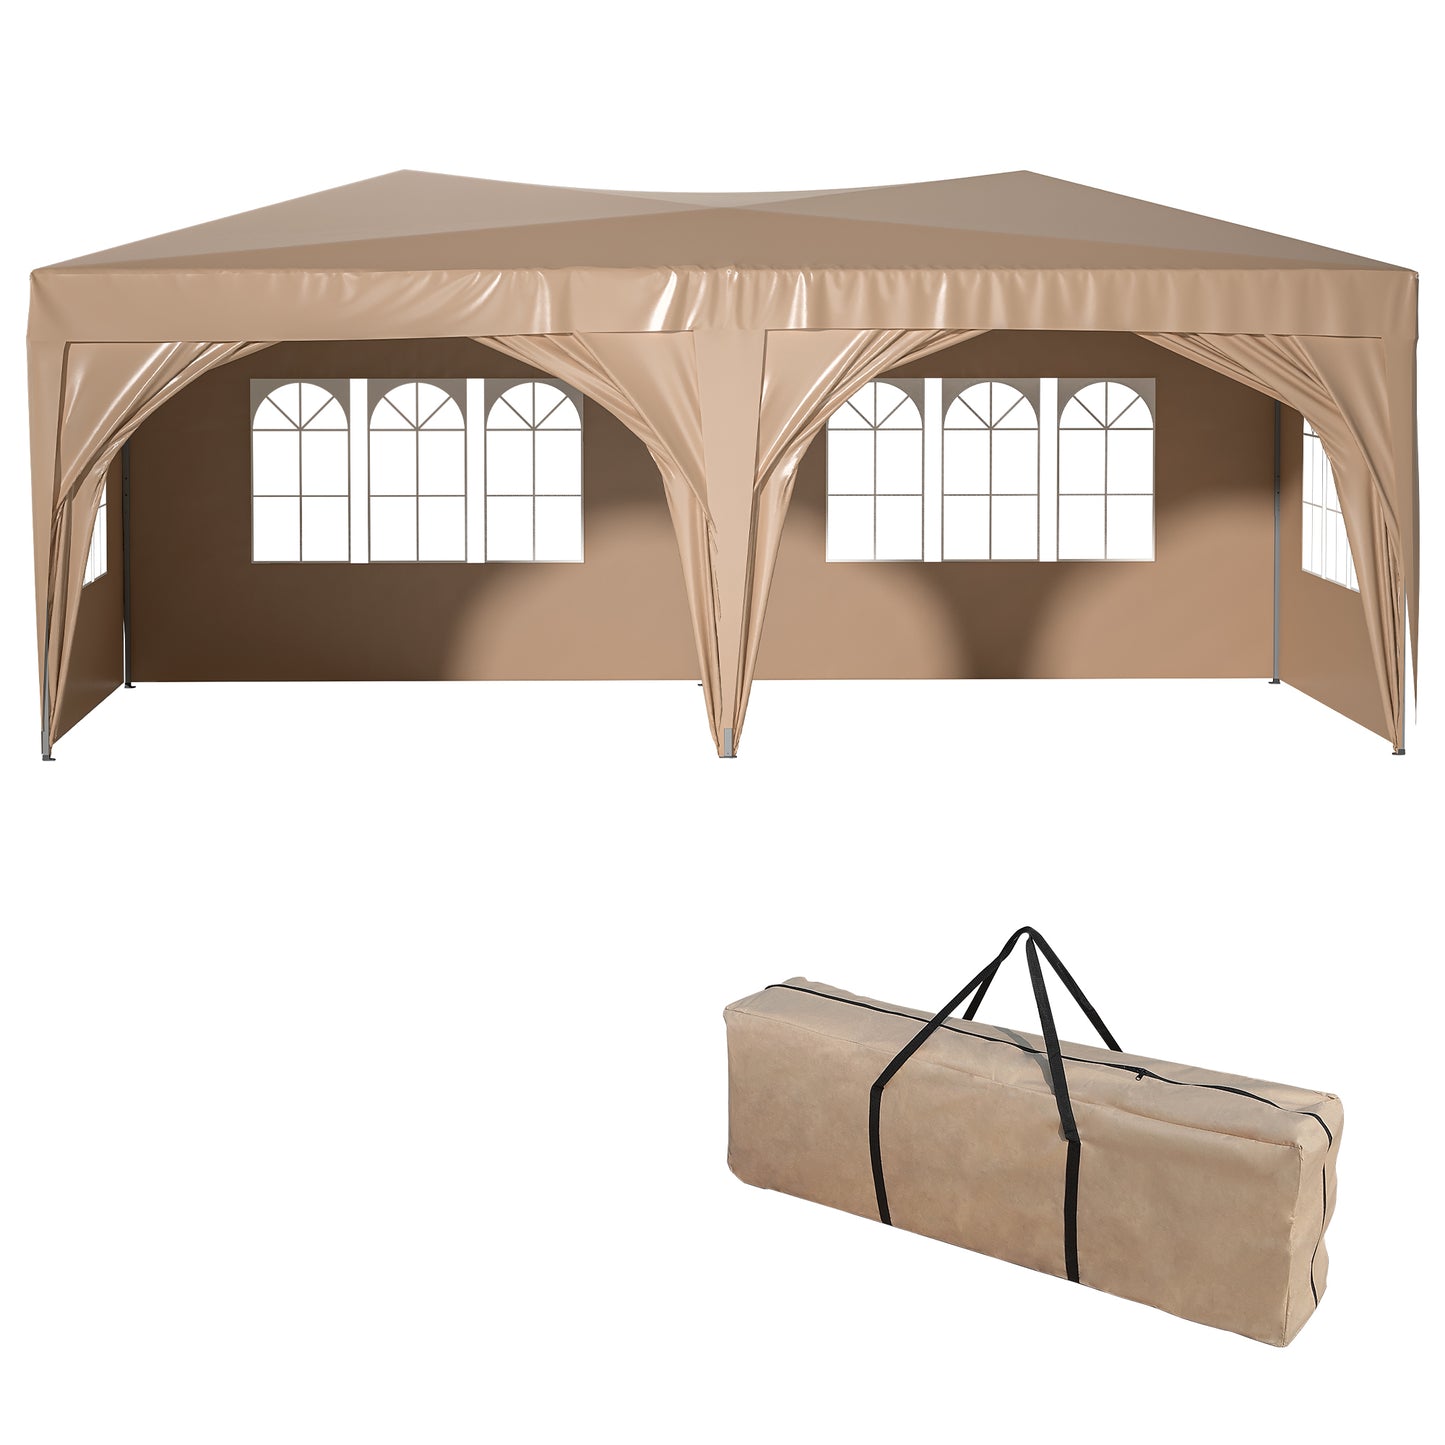 10'x20' EZ Pop Up Canopy Outdoor Portable Party Folding Tent with 6 Removable Sidewalls + Carry Bag + 6pcs Weight Bag Beige